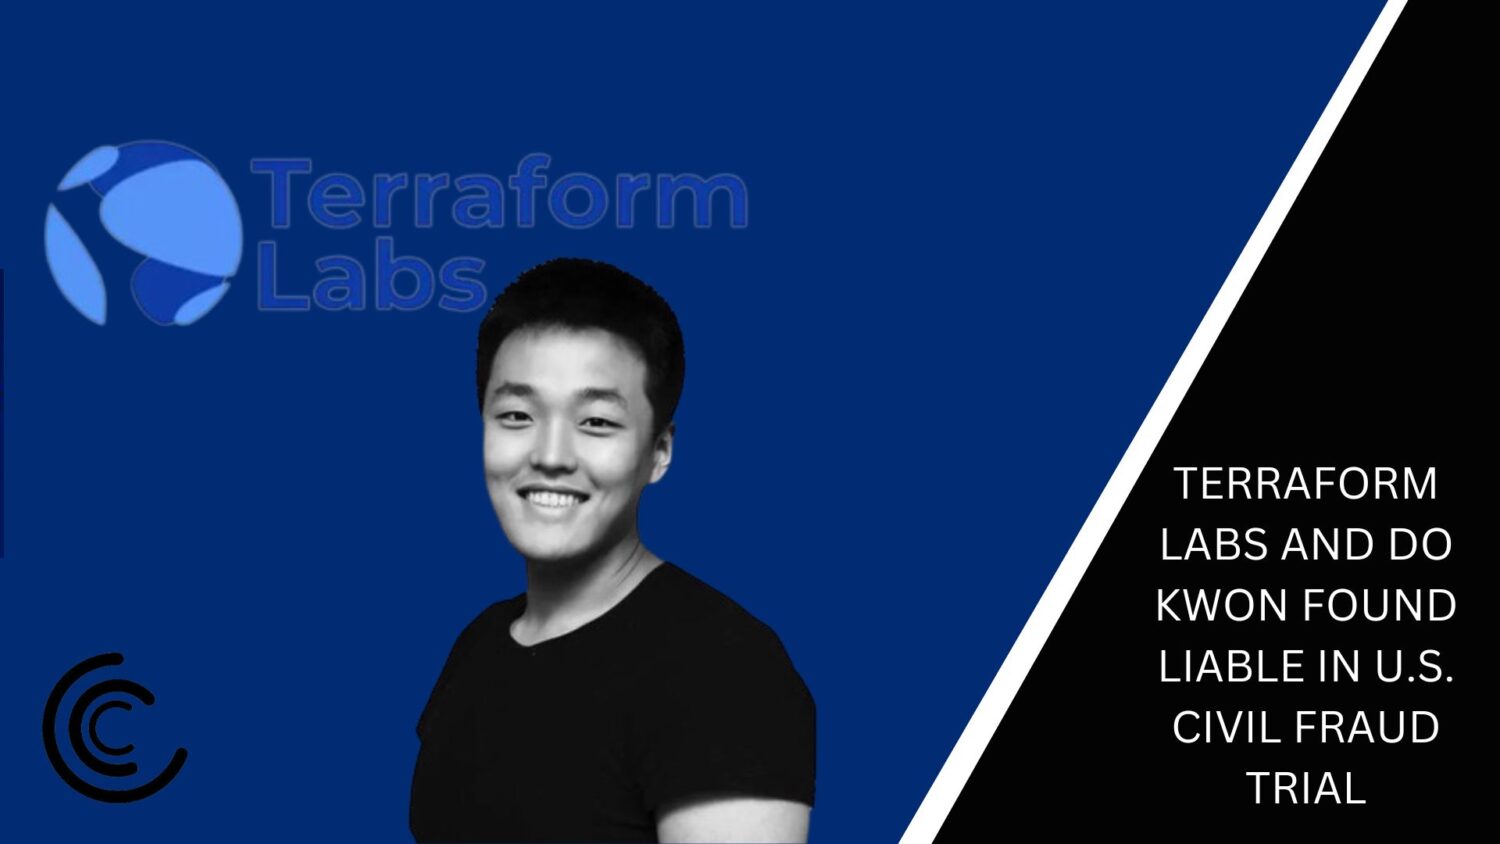 Terraform Labs And Do Kwon Found Liable In U.s. Civil Fraud Trial